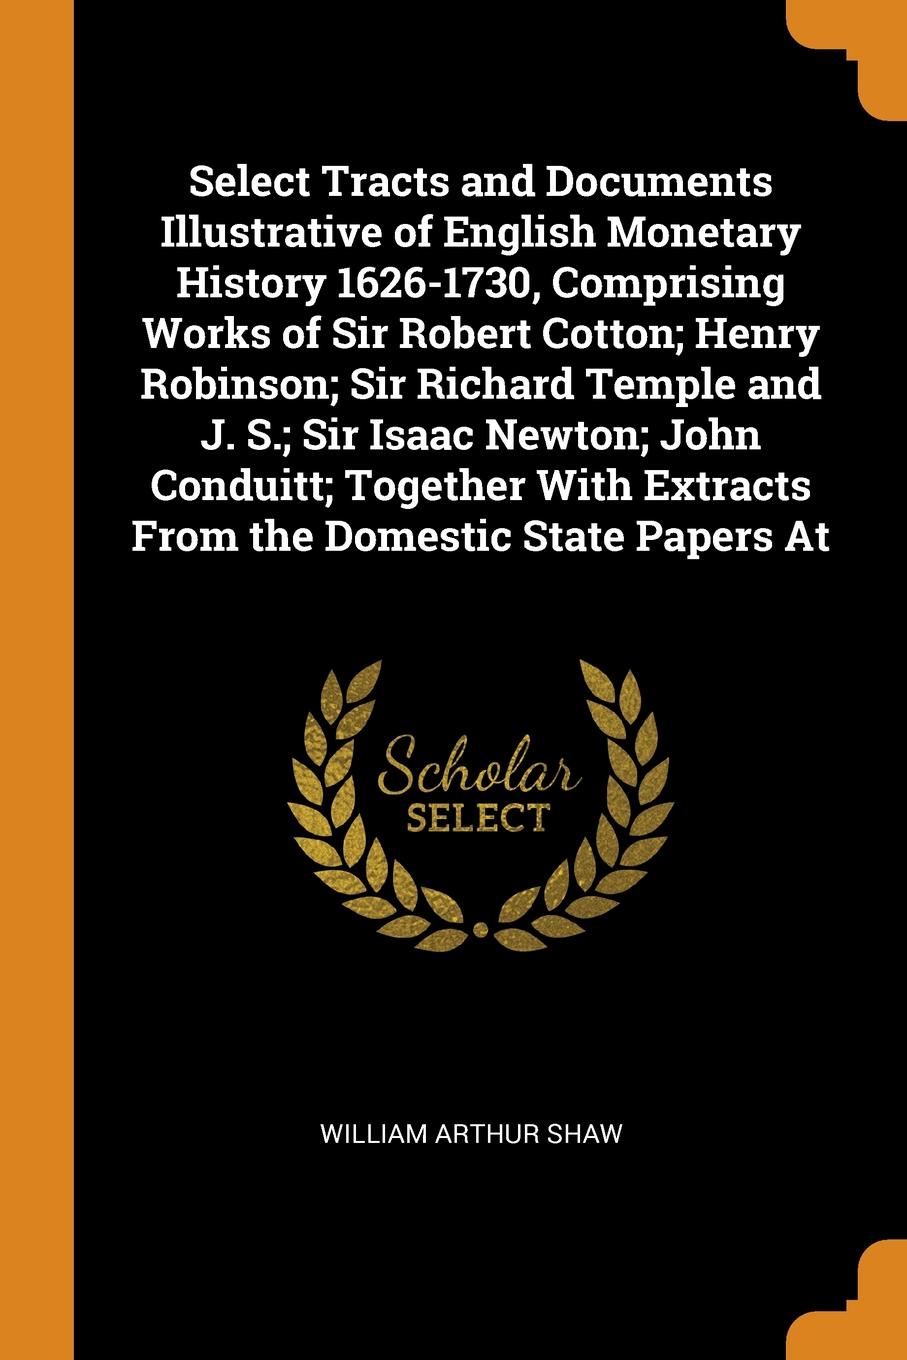 Select Tracts and Documents Illustrative of English Monetary History 1626-1730, Comprising Works of Sir Robert Cotton; Henry Robinson; Sir Richard Temple and J. S.; Sir Isaac Newton; John Conduitt; Together With Extracts From the Domestic State Pa...